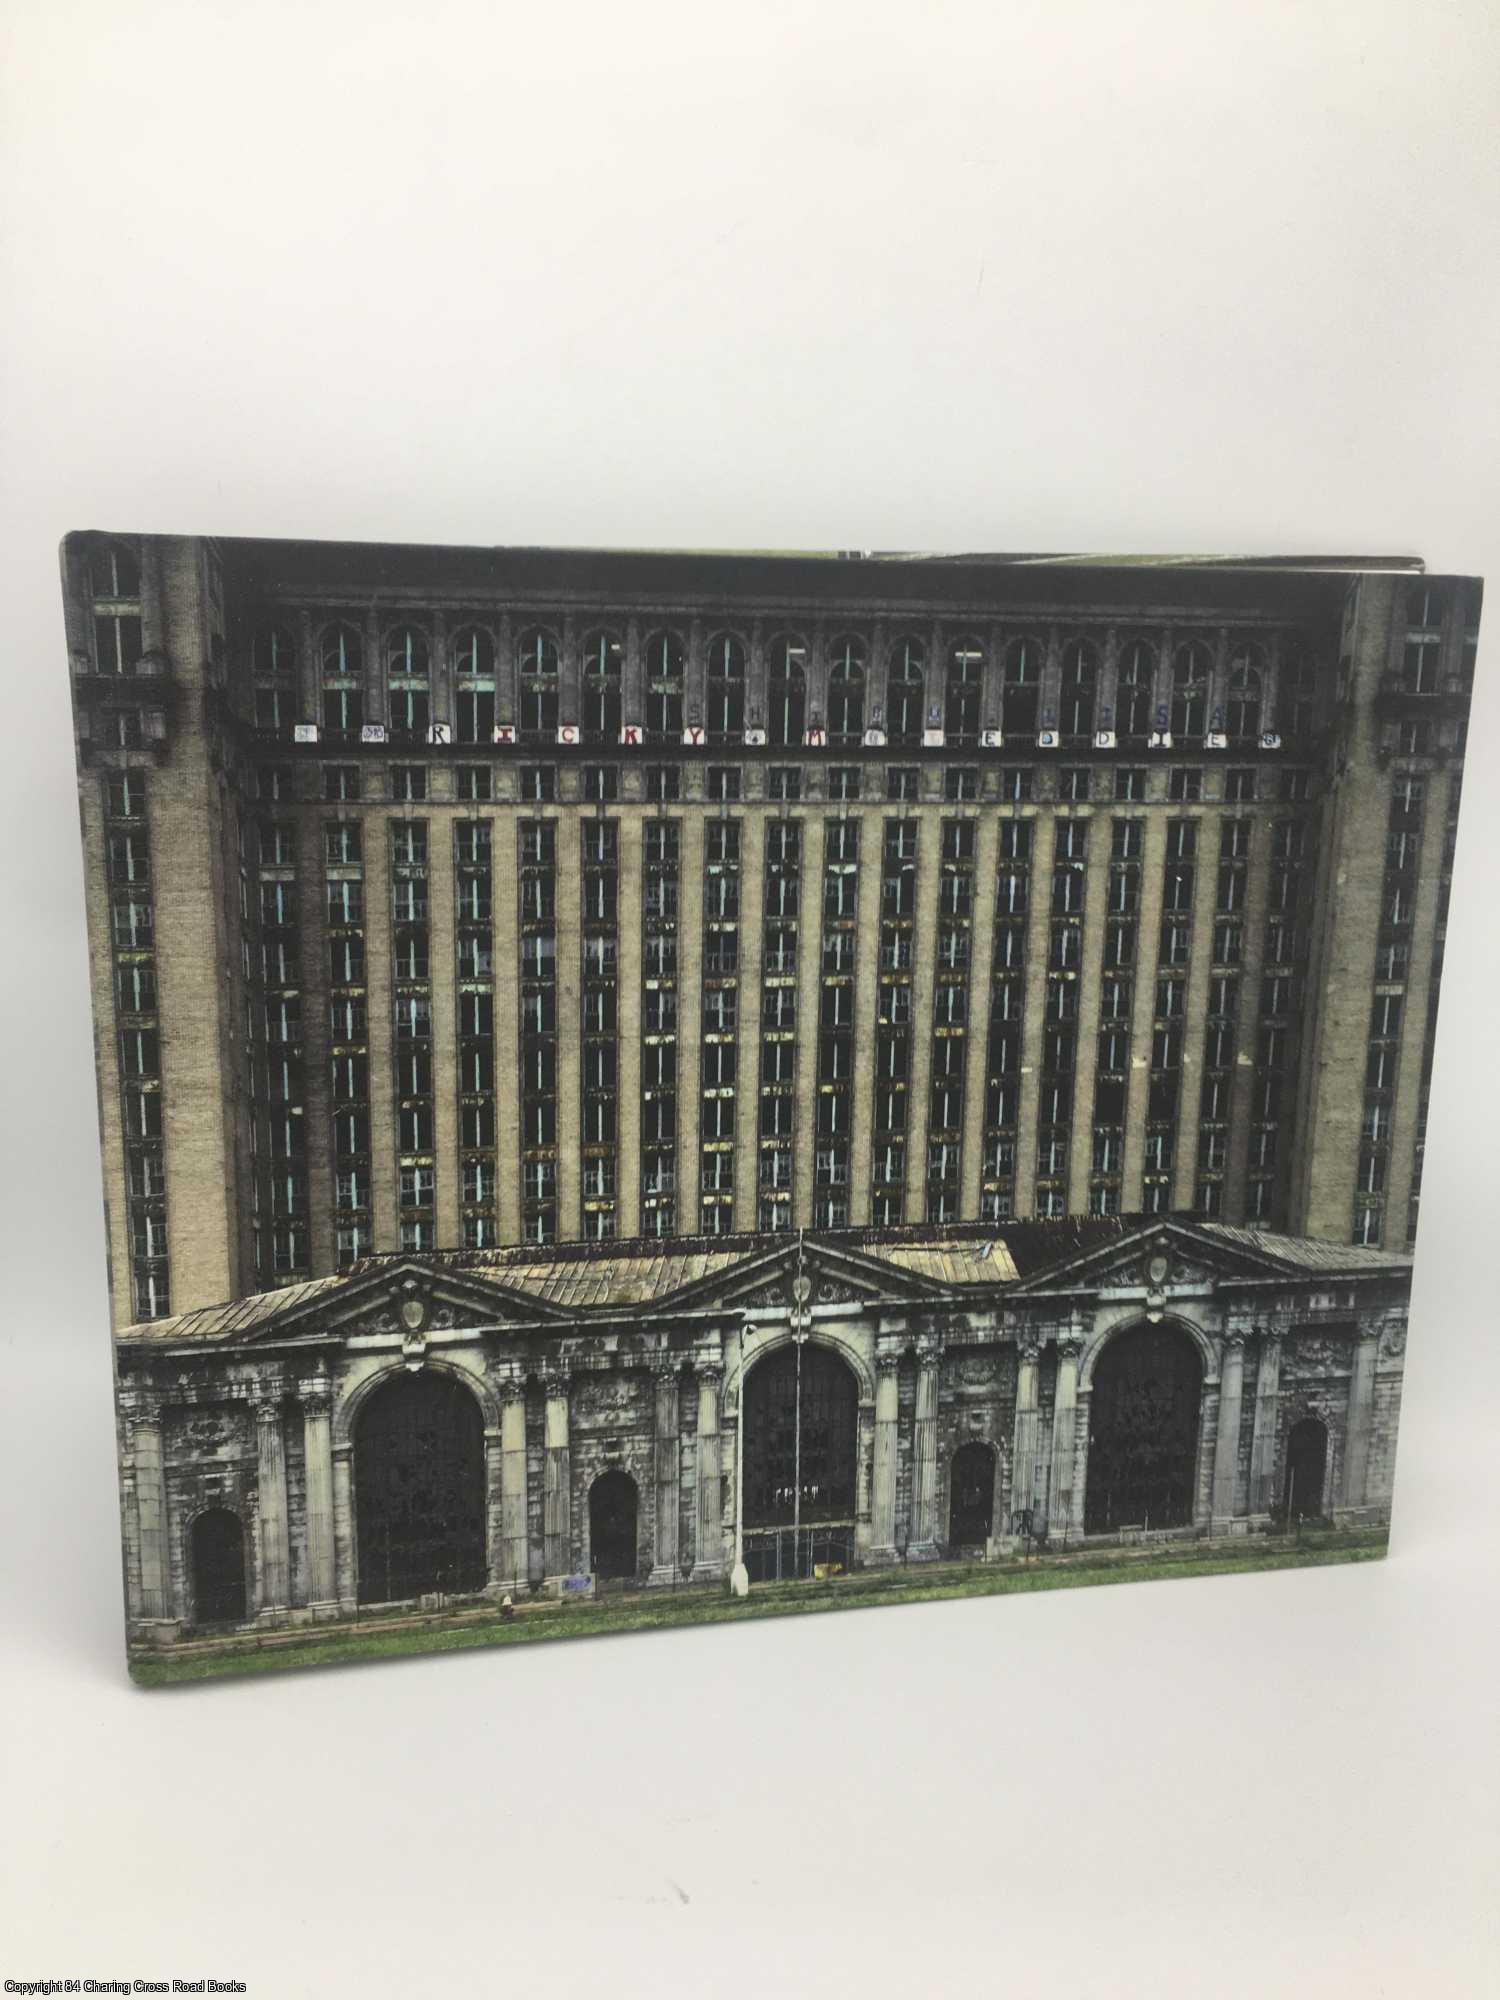 Marchand, Yves - Yves Marchand & Romain Meffre: The Ruins of Detroit